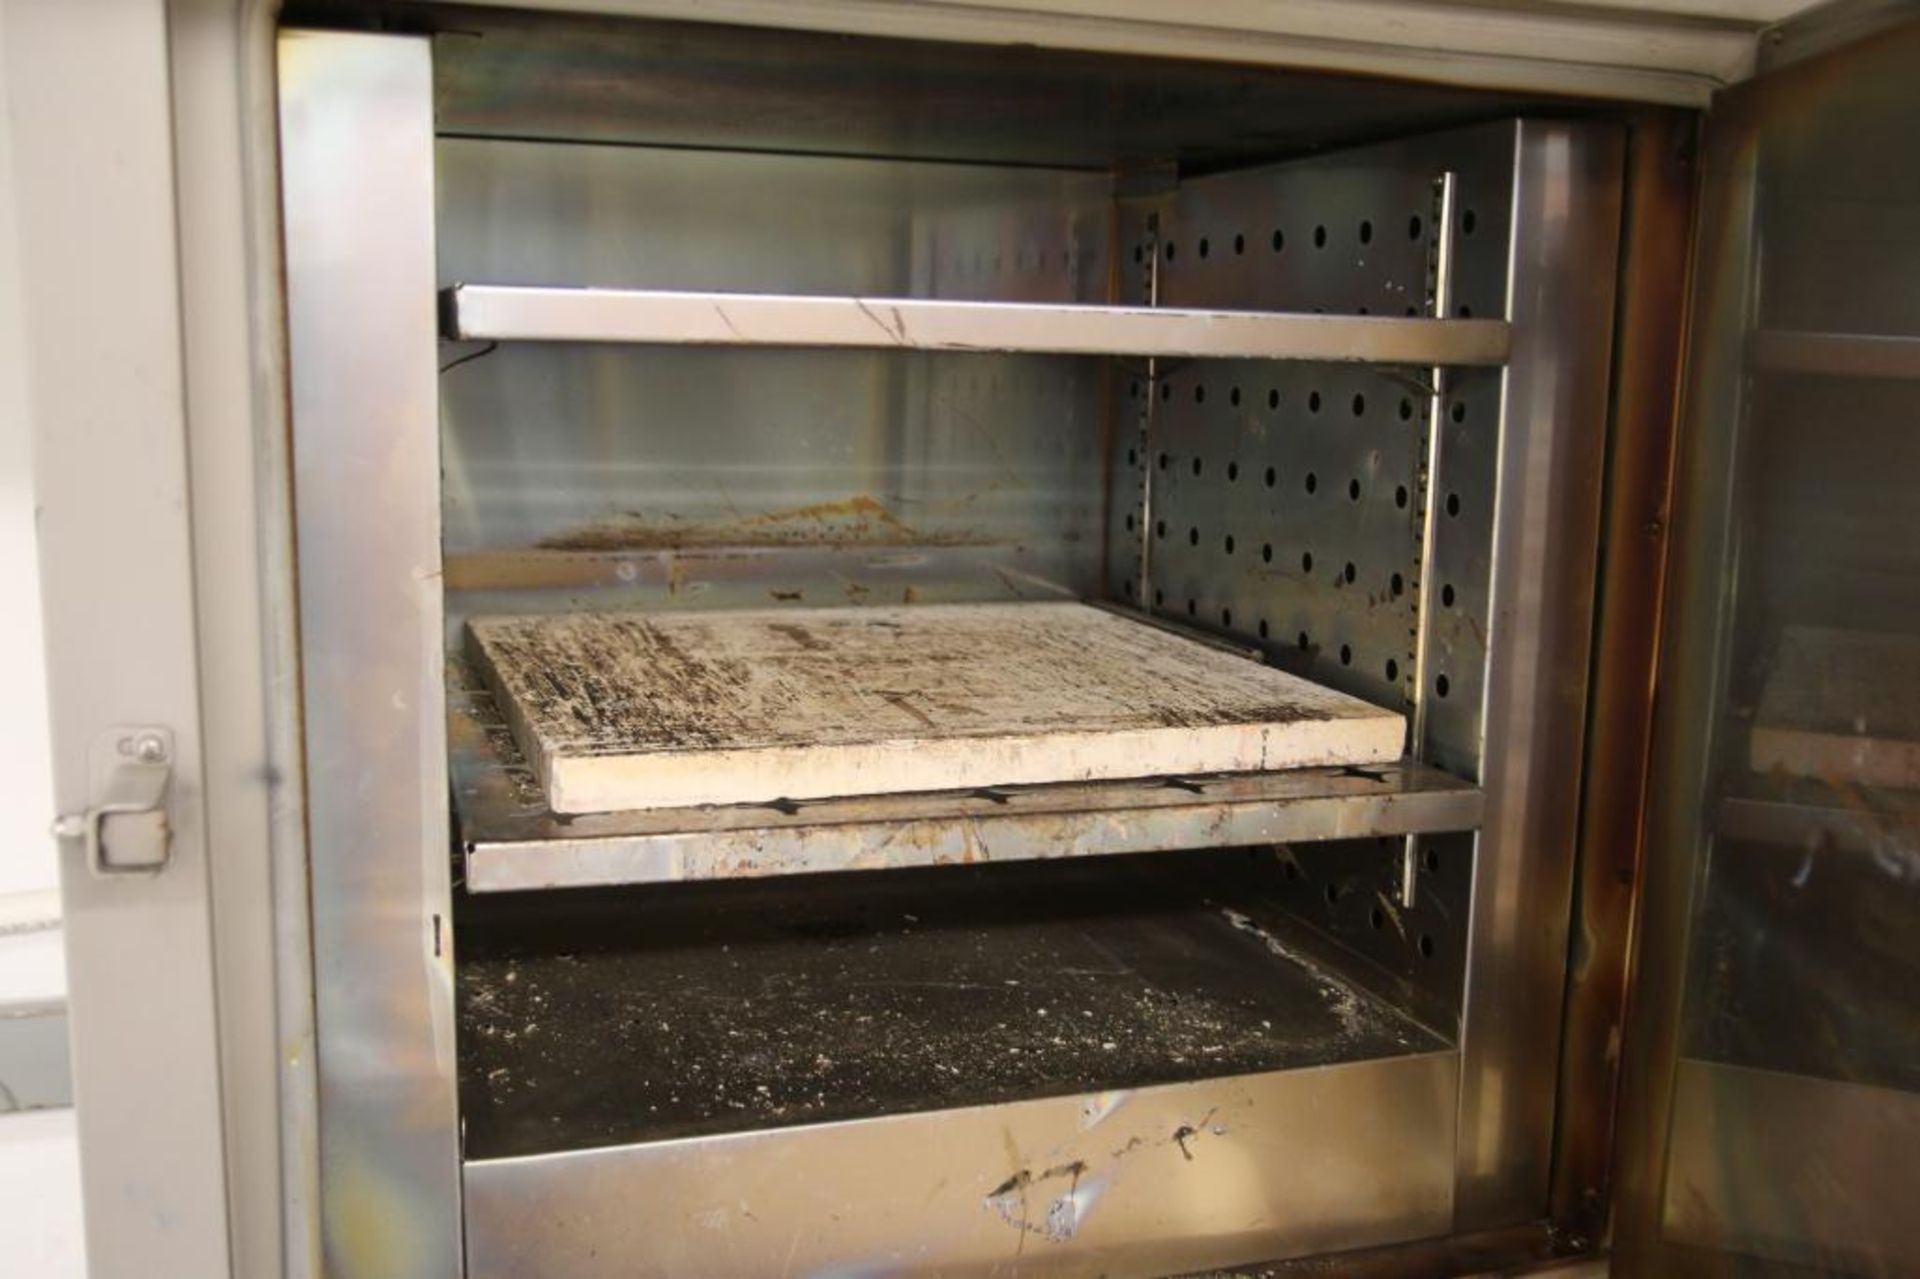 VWR 1670 High Performance Air Flow Oven - Image 3 of 3